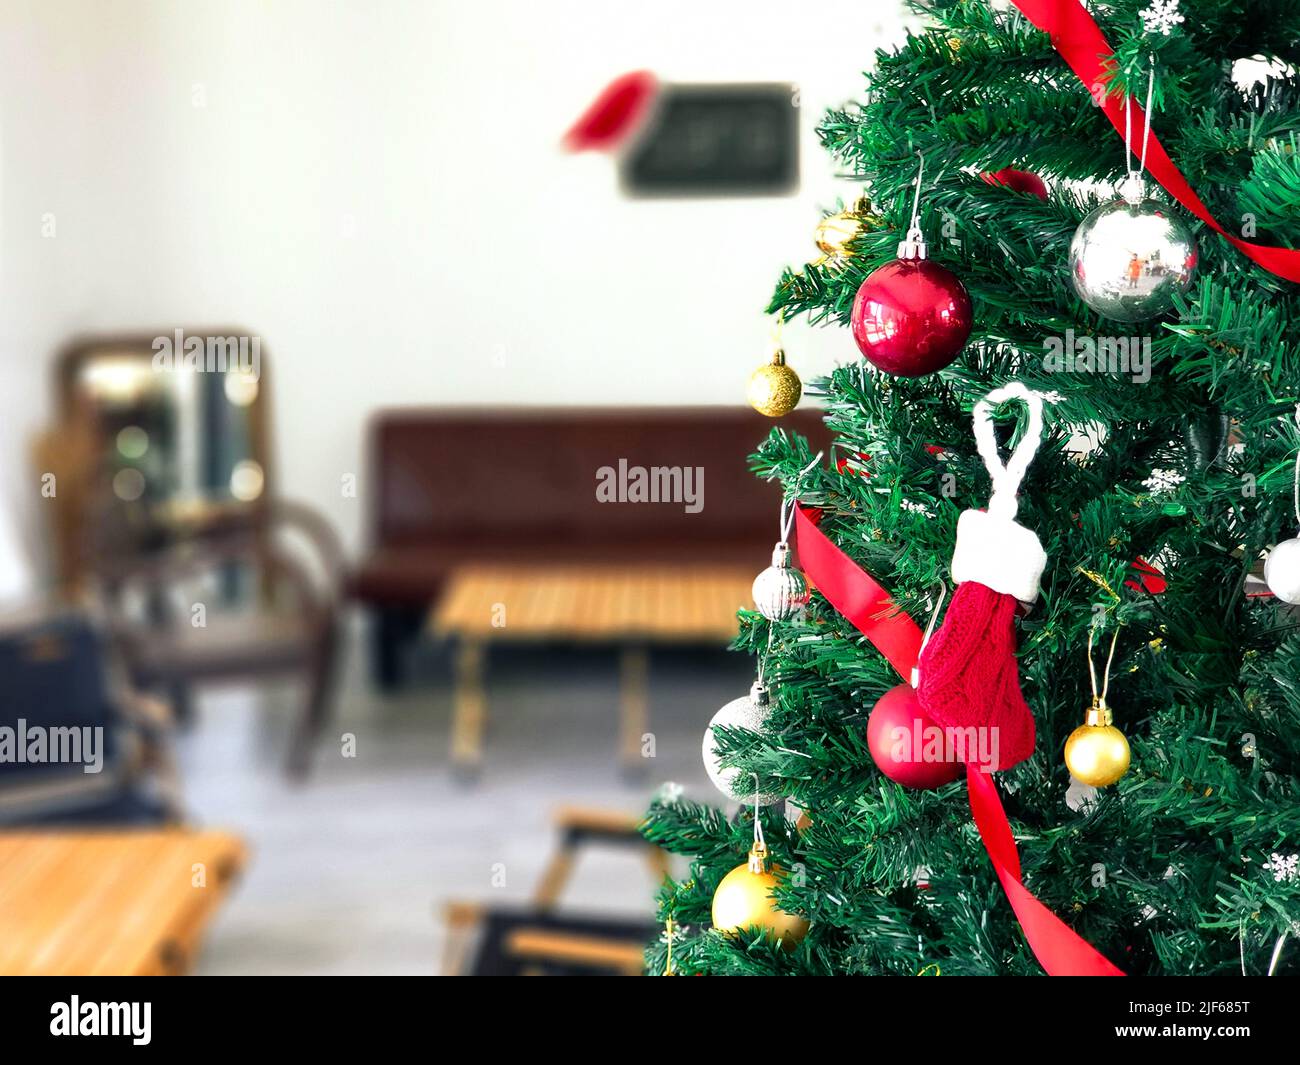 cafe  decorate with gift  on Christmas tree Stock Photo